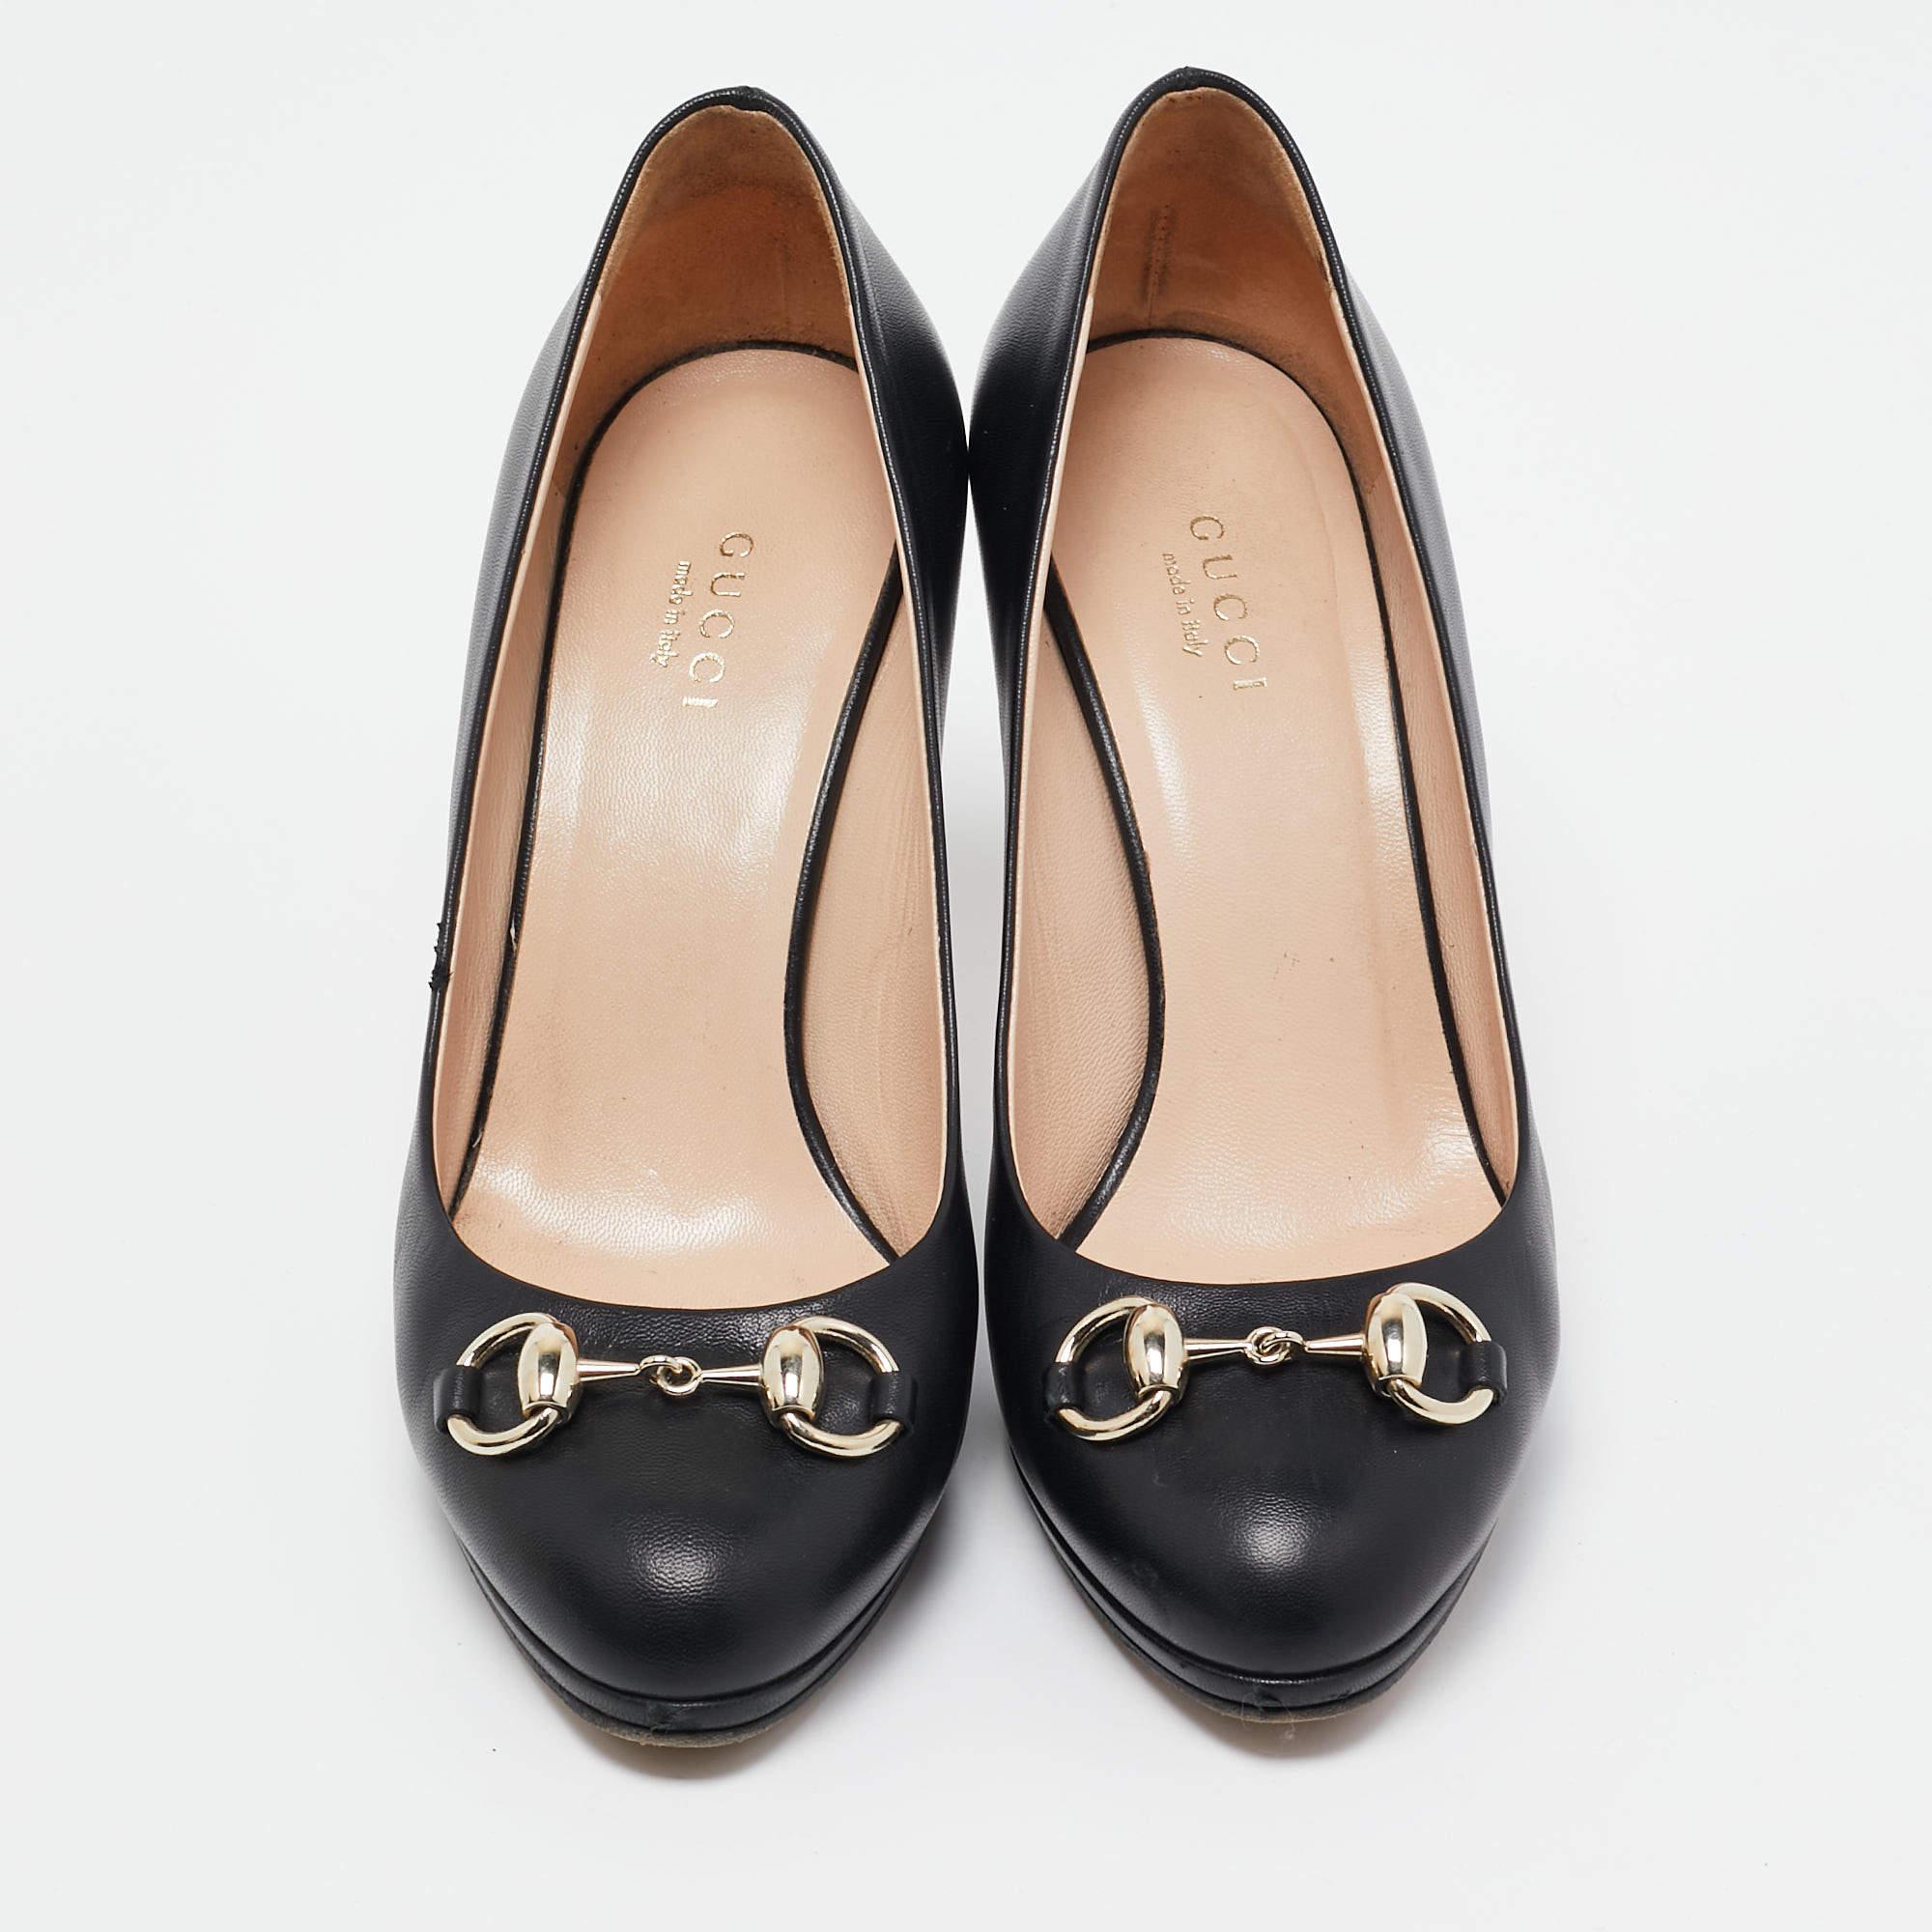 Flaunt a minimalist yet bold look with this pair of leather pumps from Gucci. They have been created in an almond-toe silhouette and styled with the signature gold-tone Horsebit accents on the uppers. Comfortable insoles, thin platforms, and 8cm